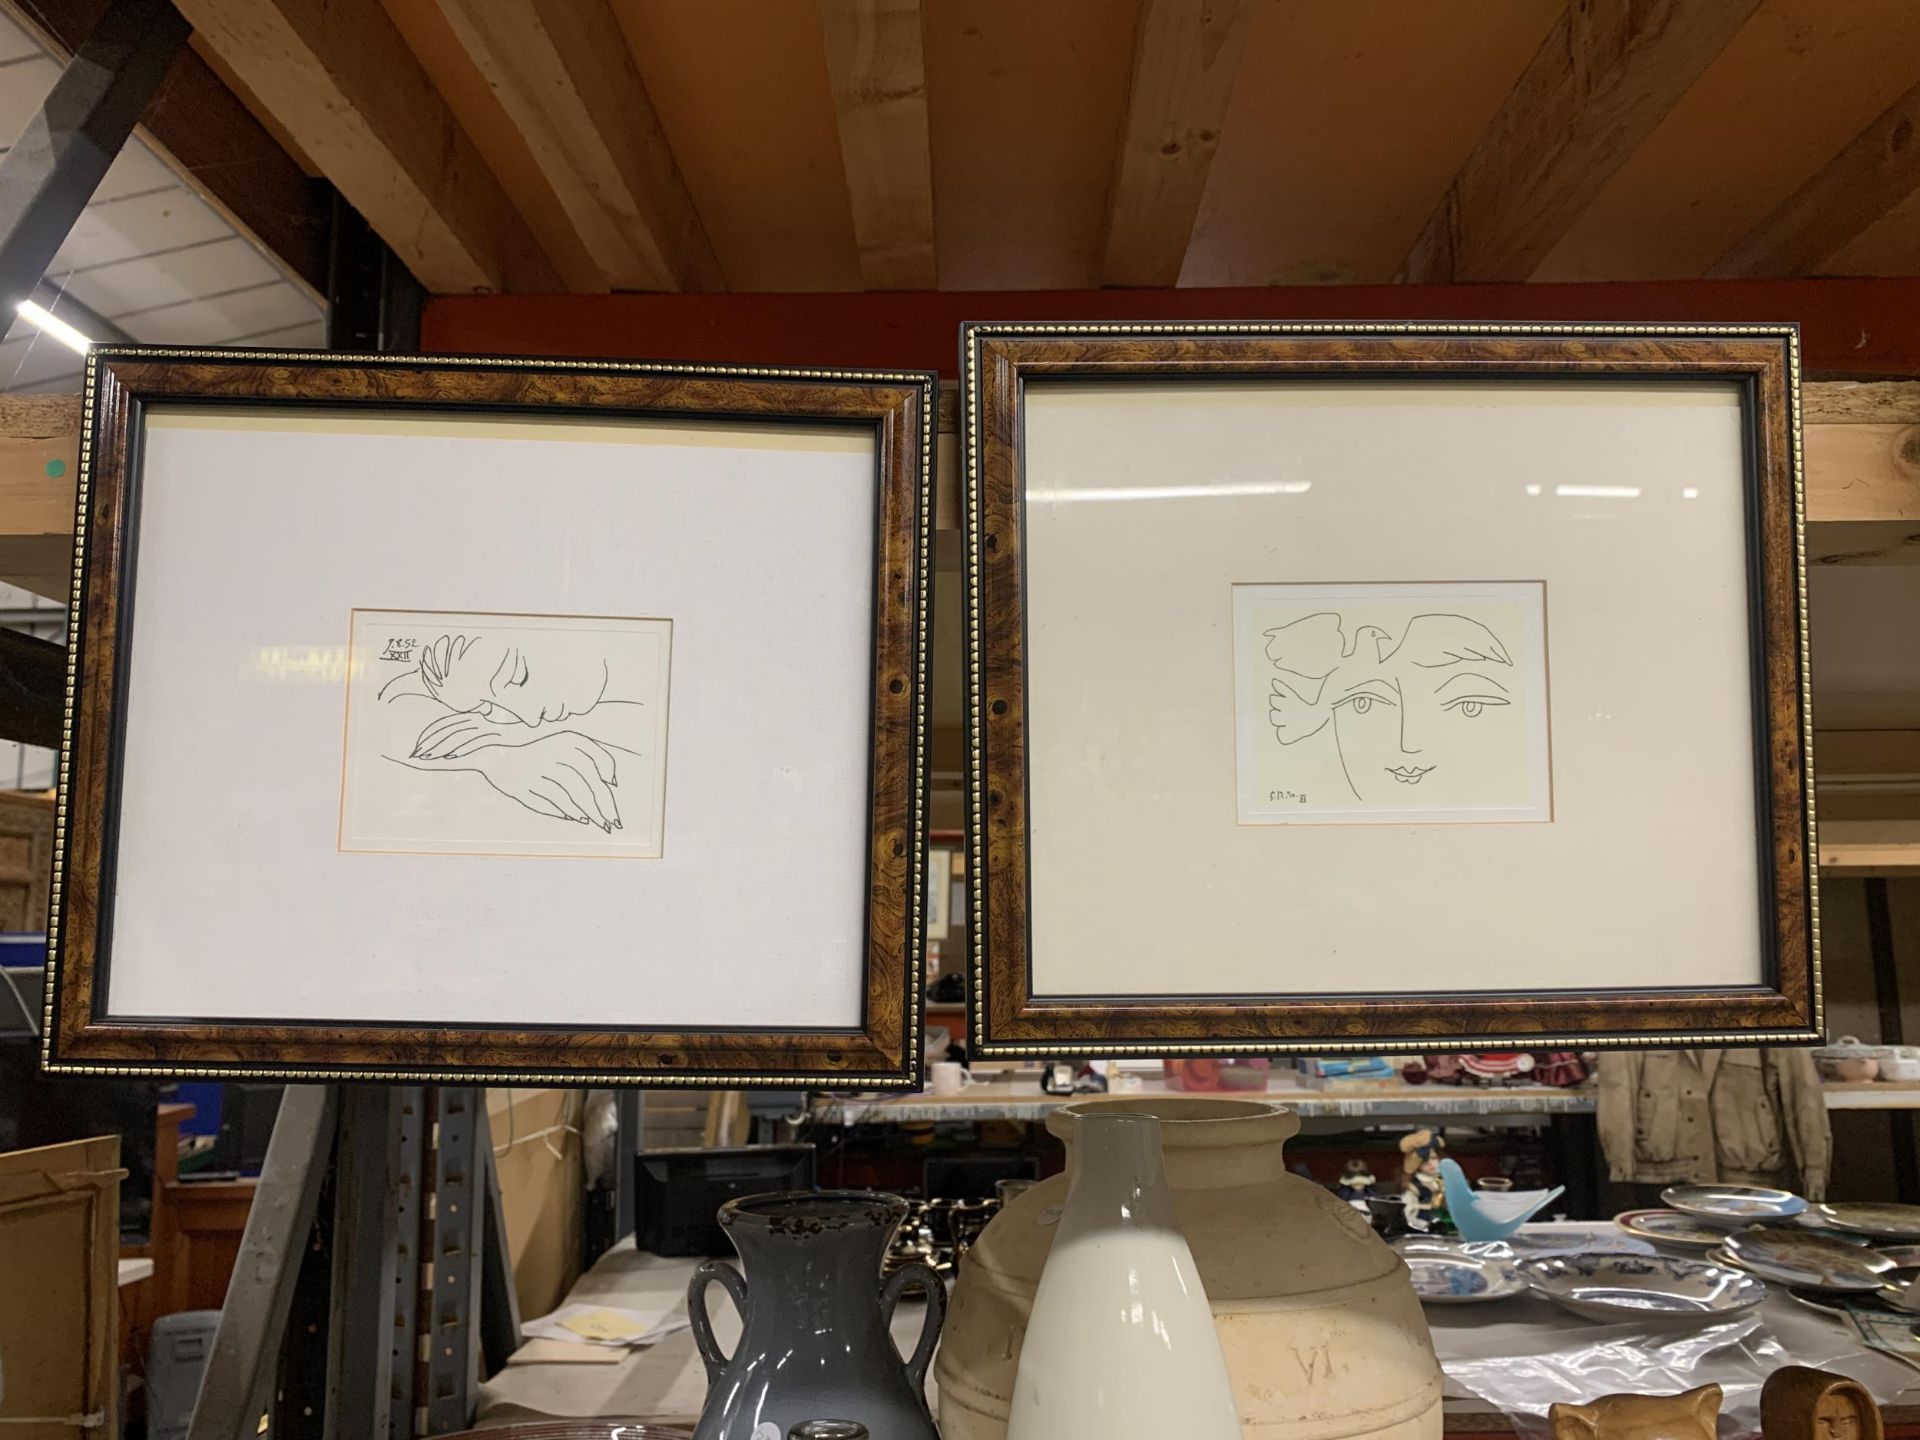 TWO FRAMED PENCIL DRAWINGS